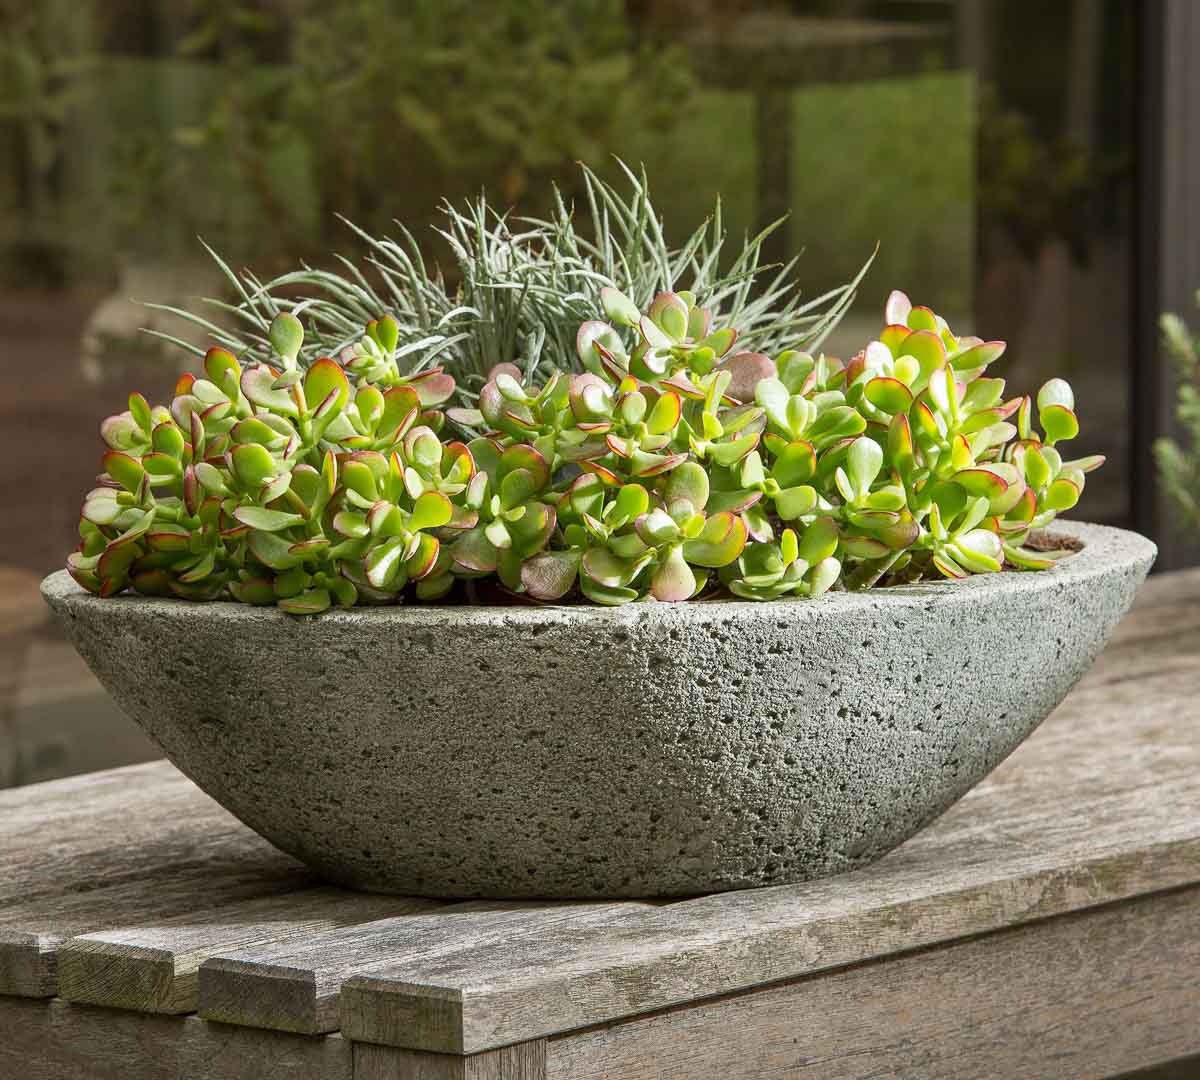 Cast stone bowl with succulents that could be used as dining table centerpiece